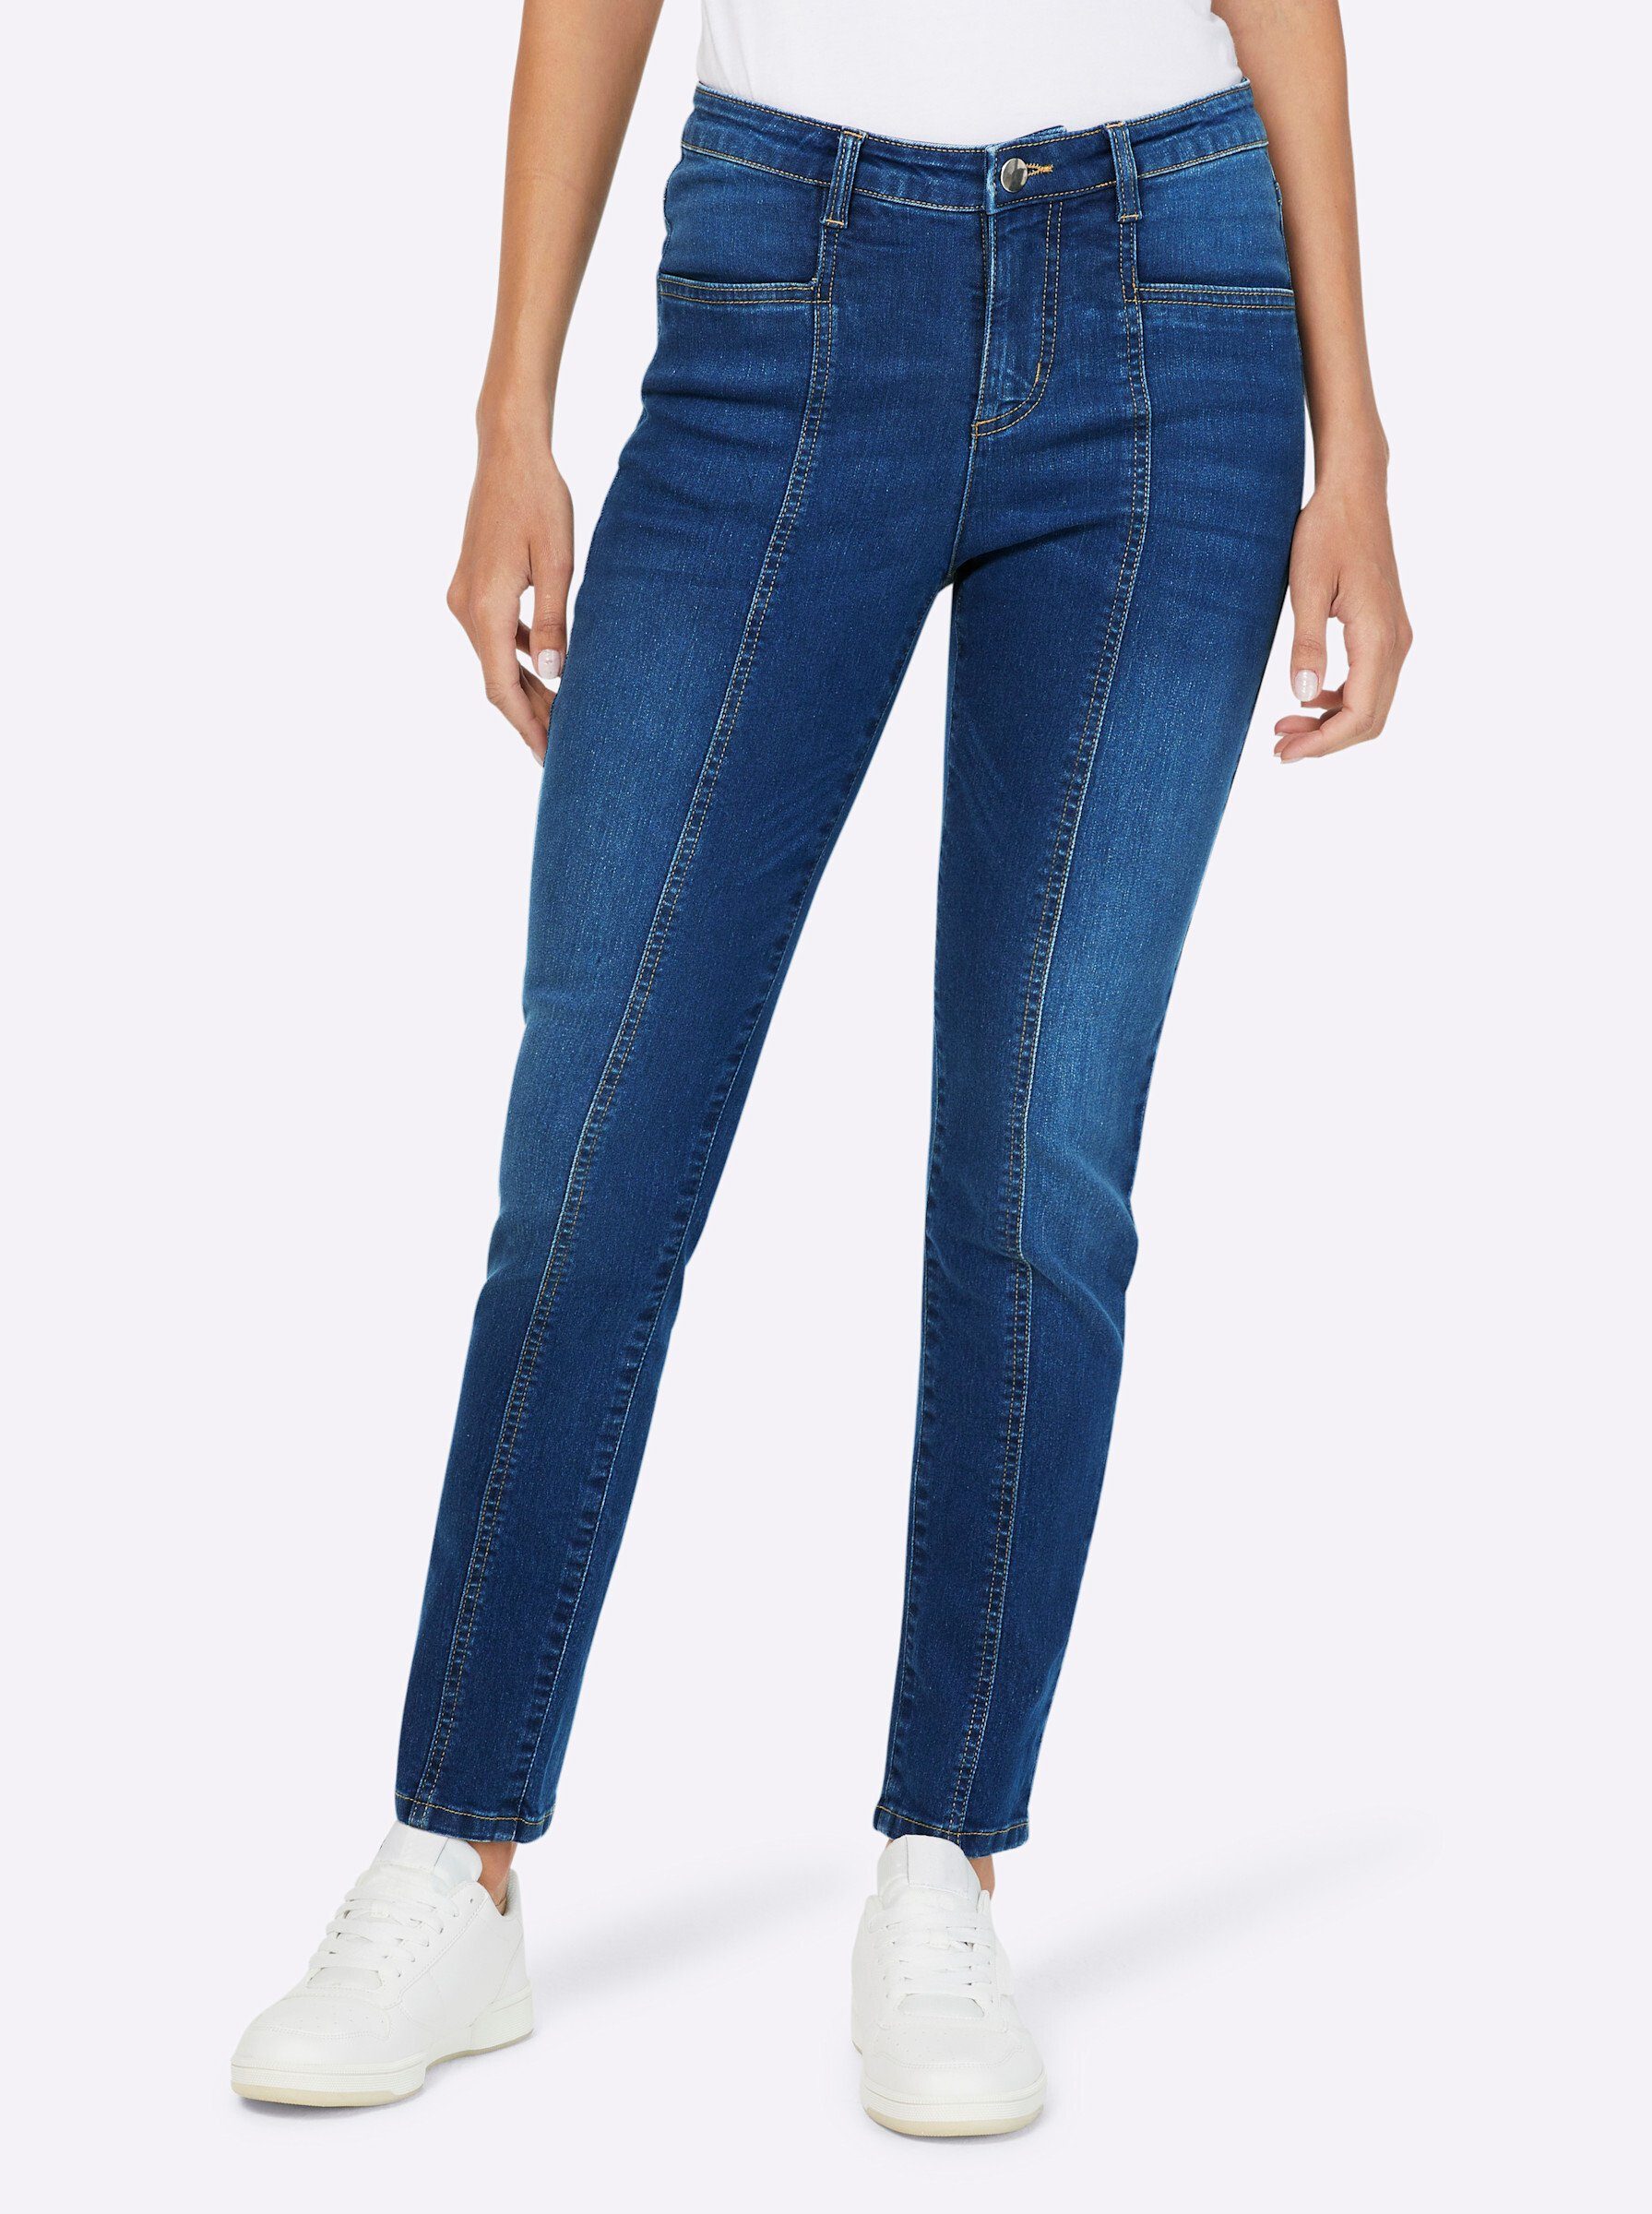 Jeans blue-stone-washed heine Bequeme